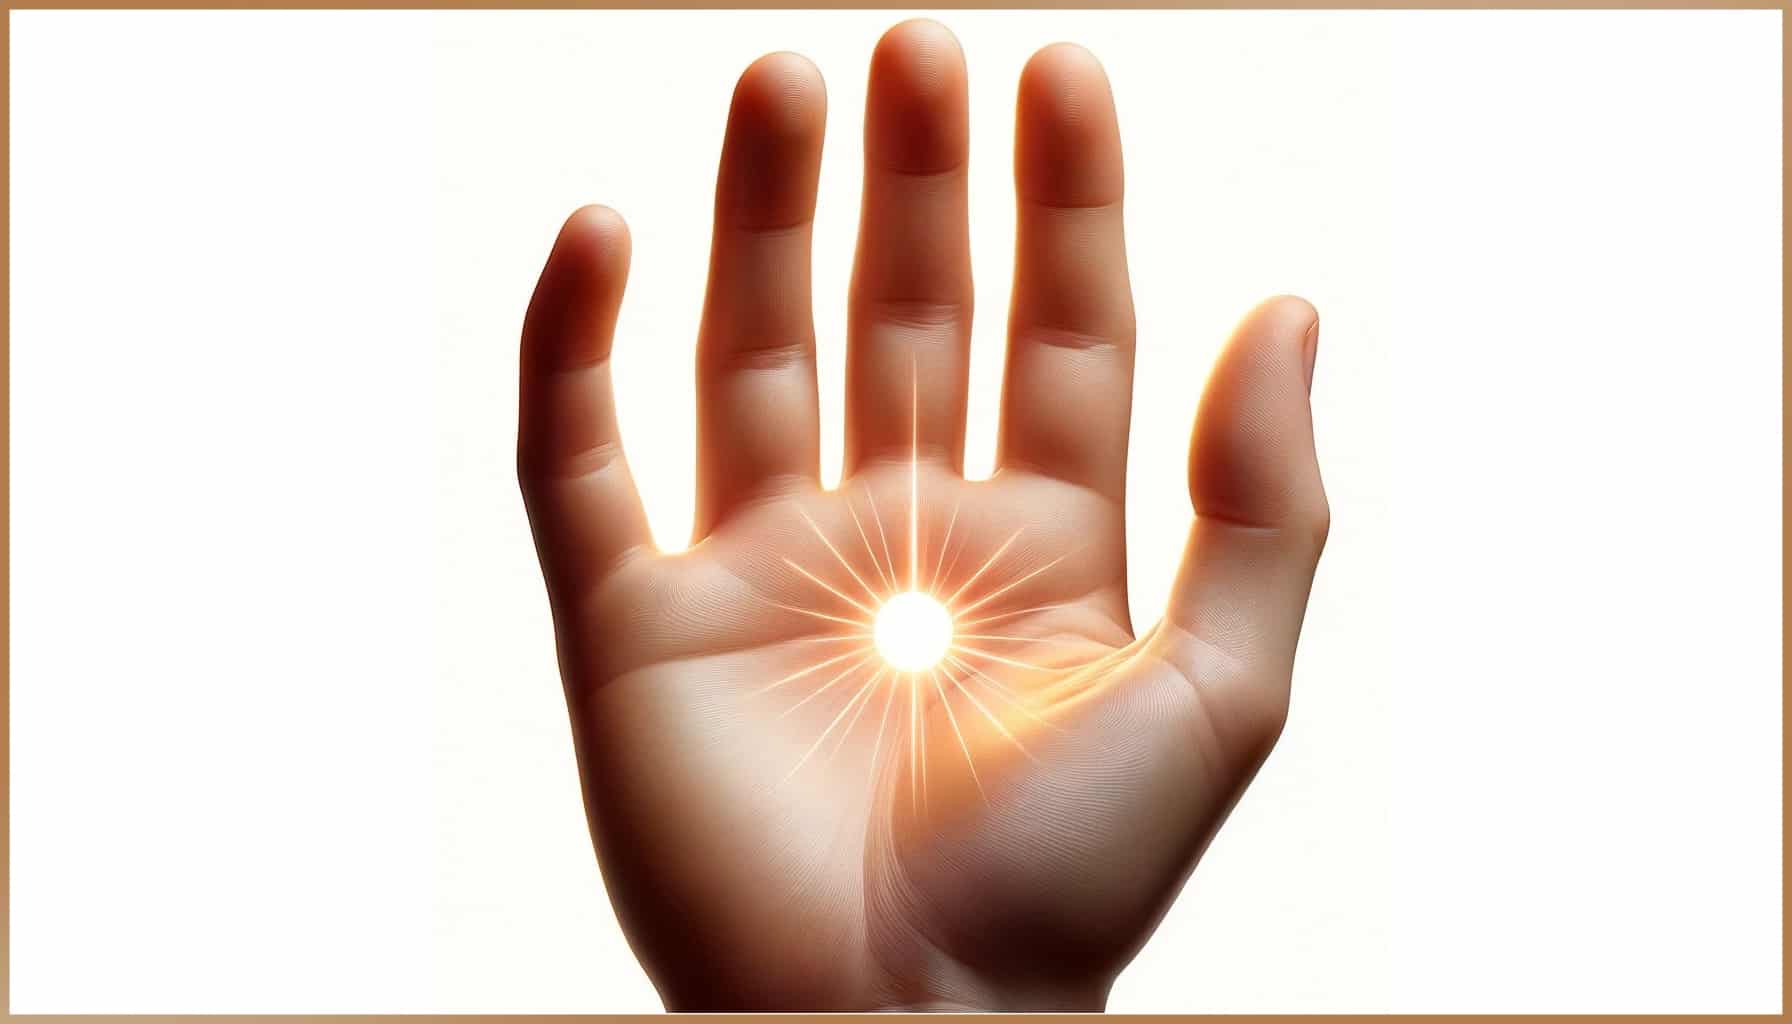 A realistic human palm with a glowing psi ball of energy in the center, symbolizing focus and energy manipulation.